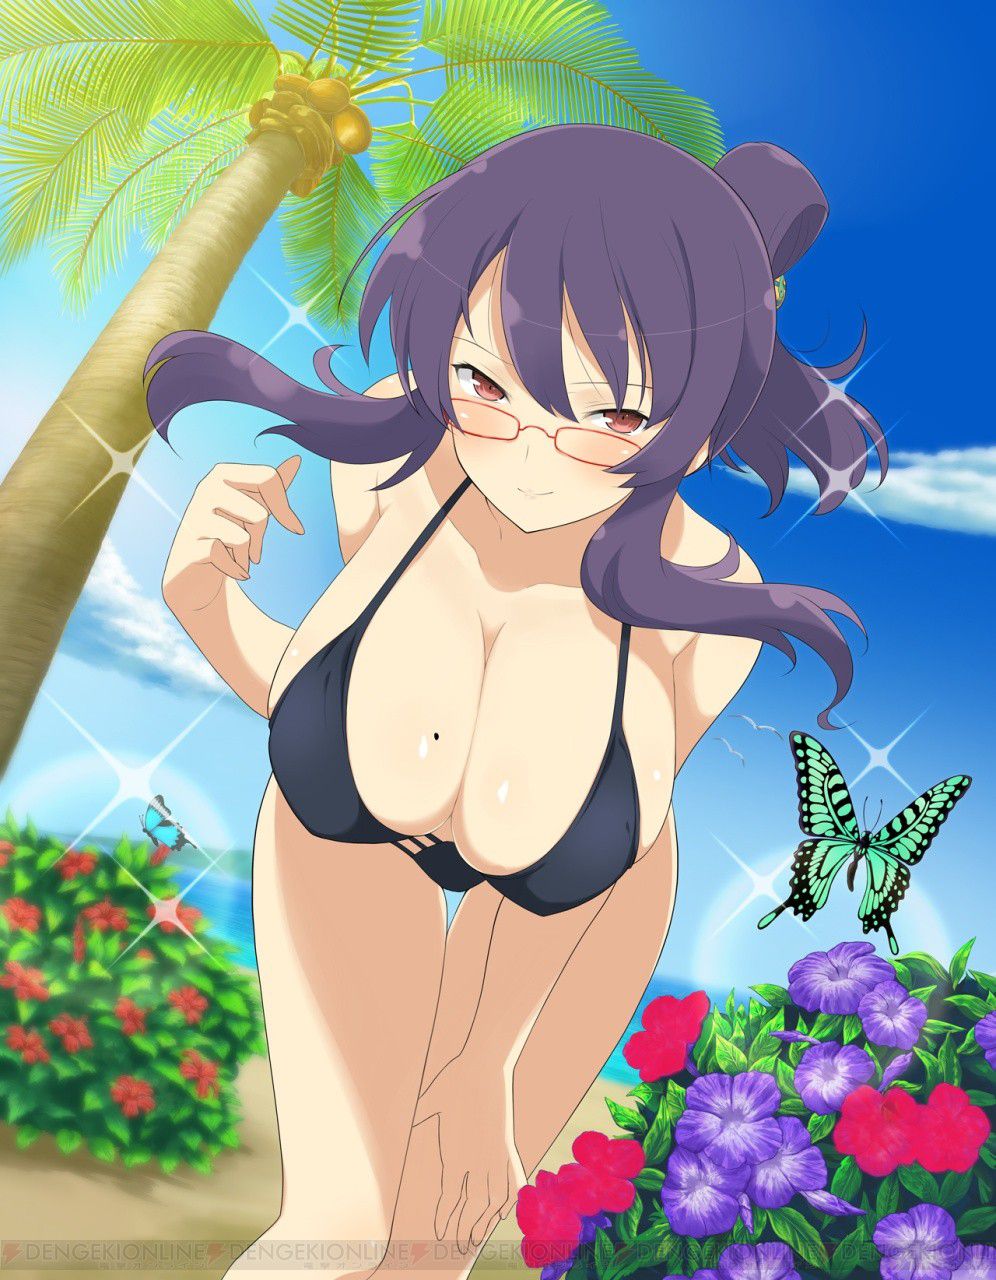 [Senran Kagura] [best PIE Championship] is held! Popular character vote is determined by the size of the breast! 24